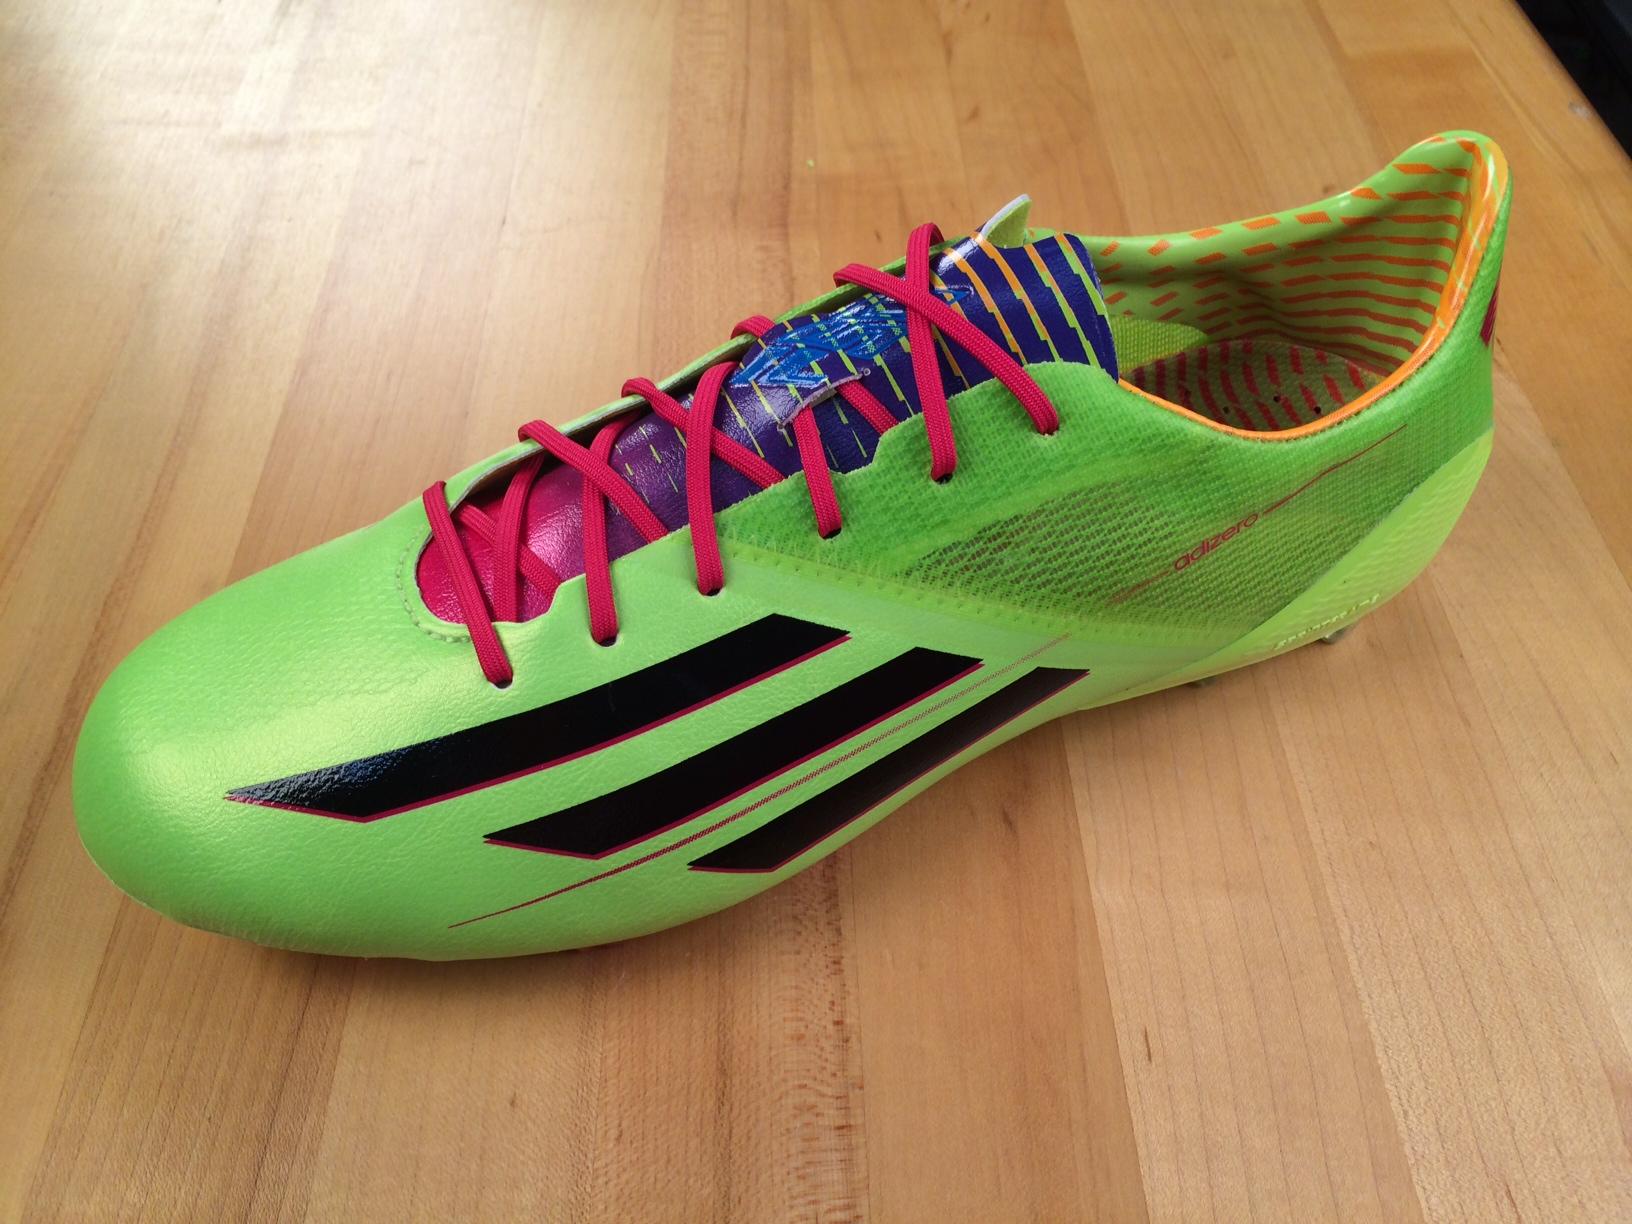 SOCCER.COM dissects the adidas F50